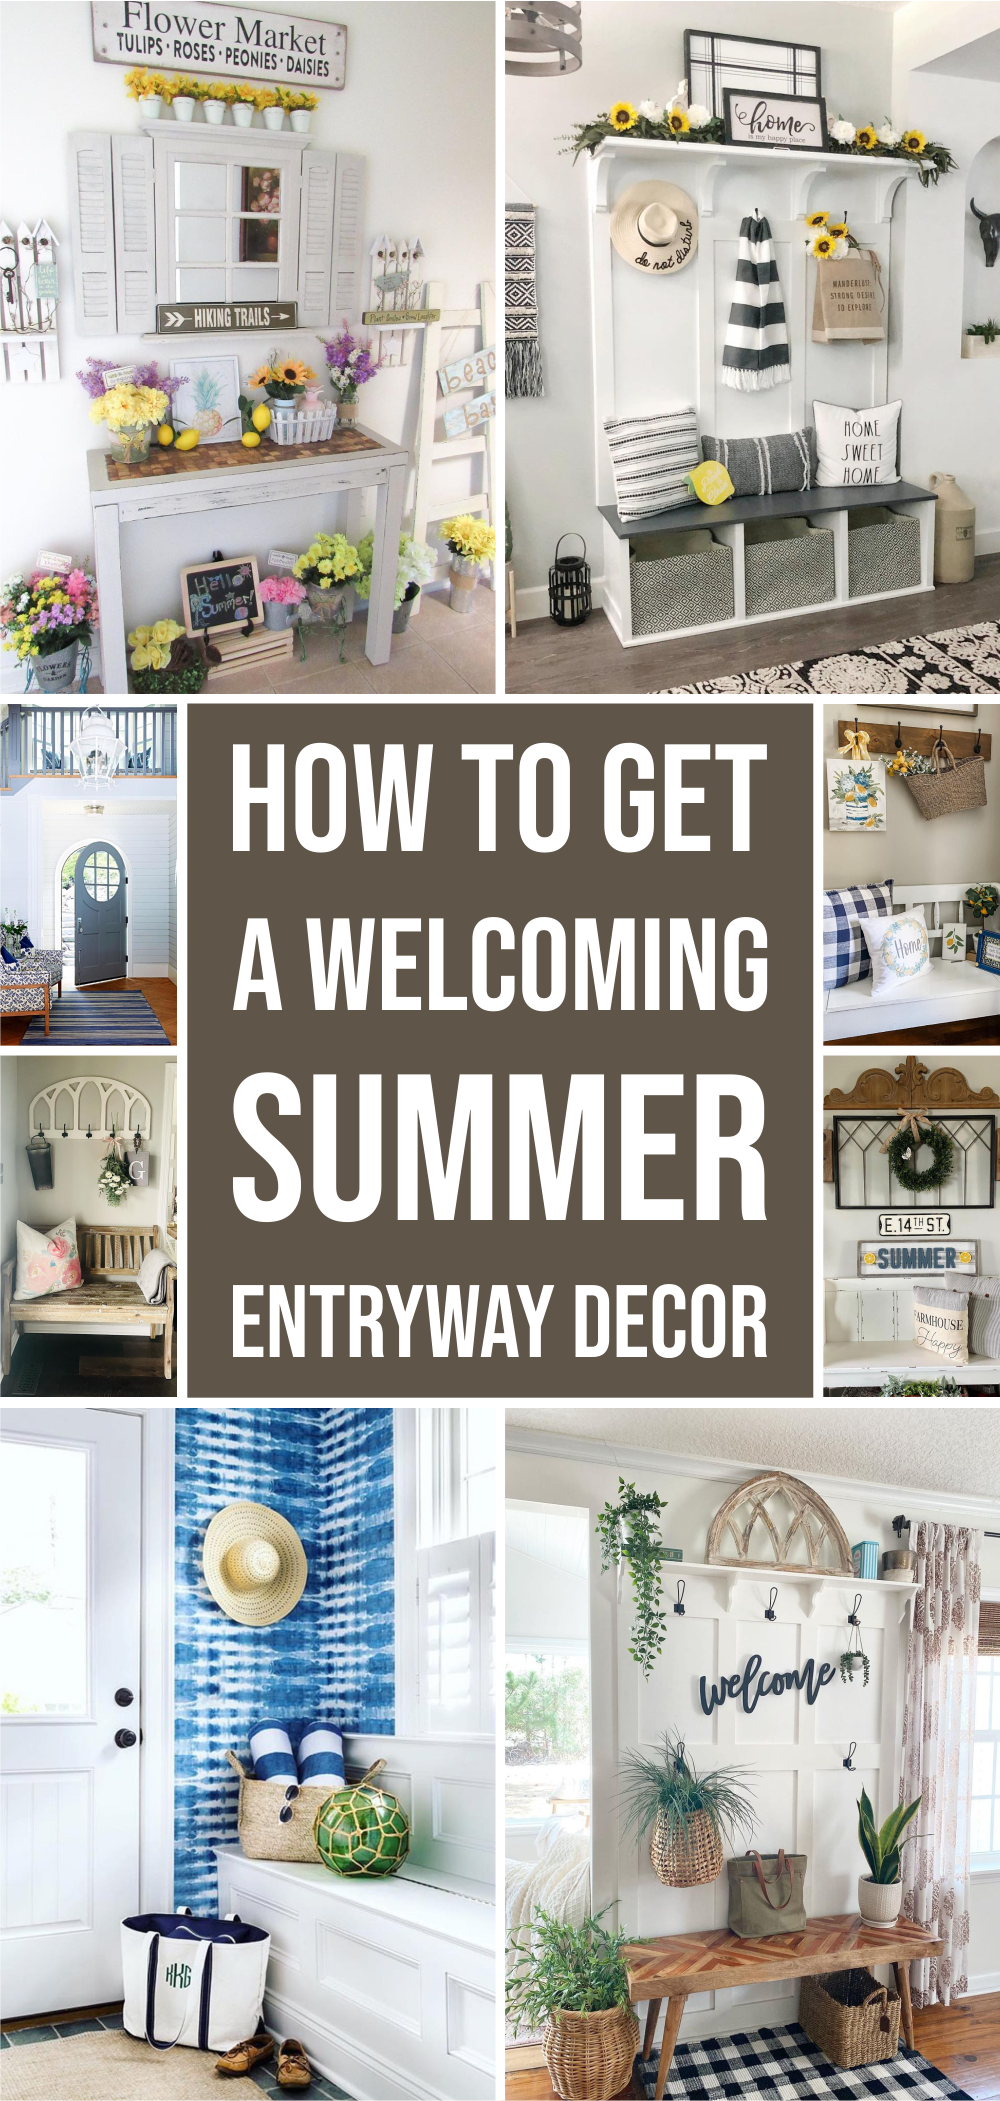 How to Get A Welcoming Summer Entryway Decor